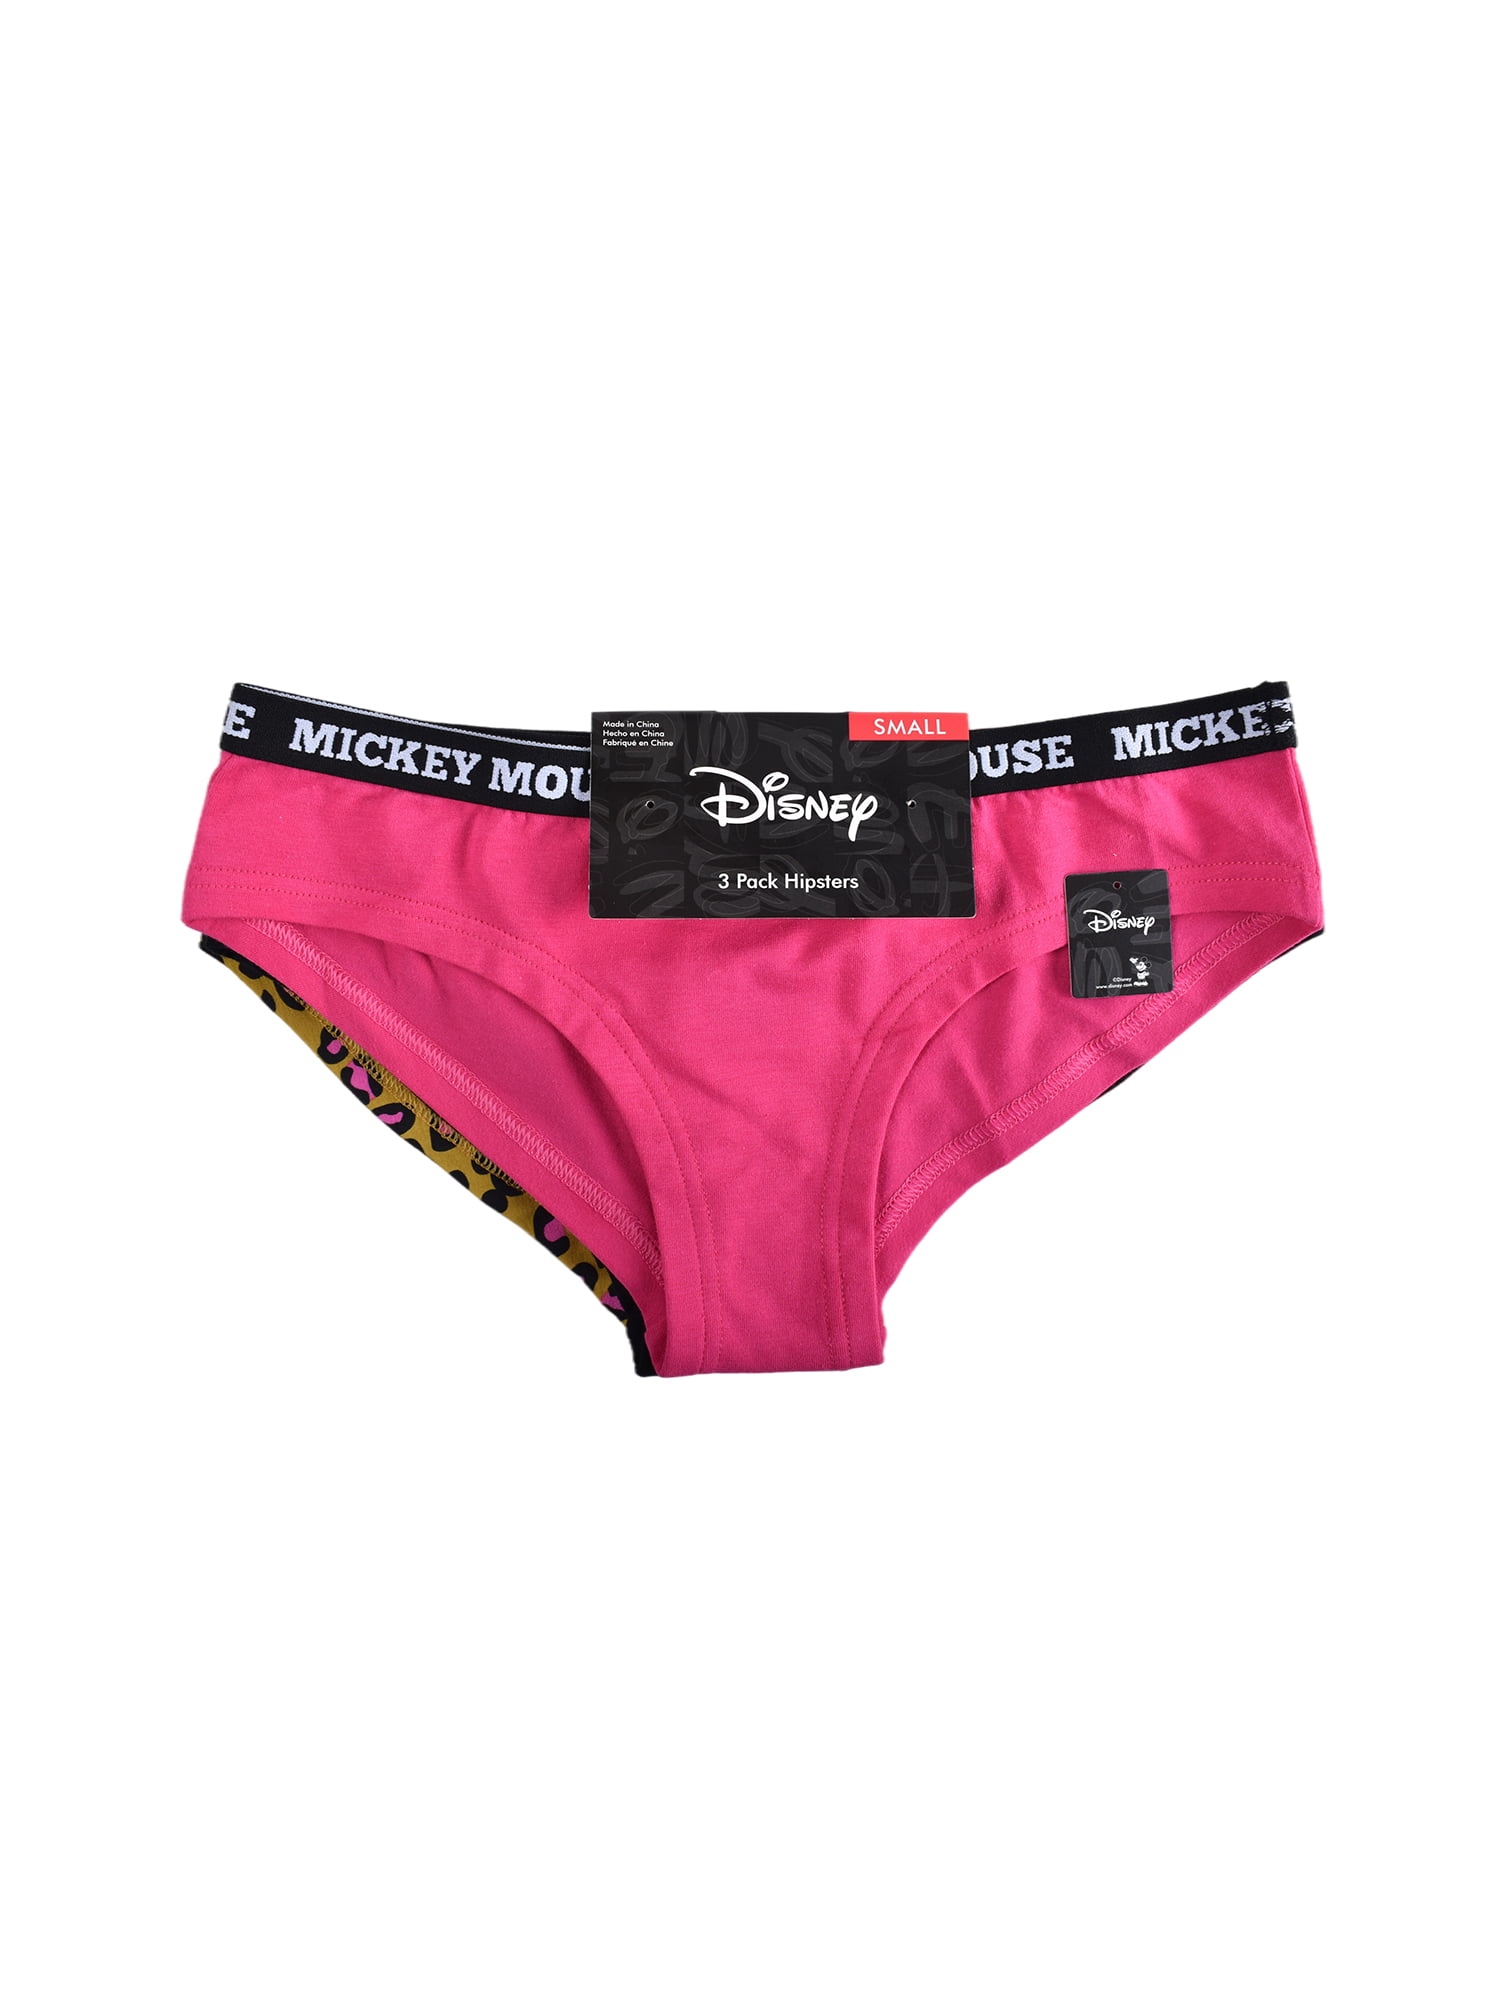 Mickey Mouse Women's Hipster Panties, 3 Pack 